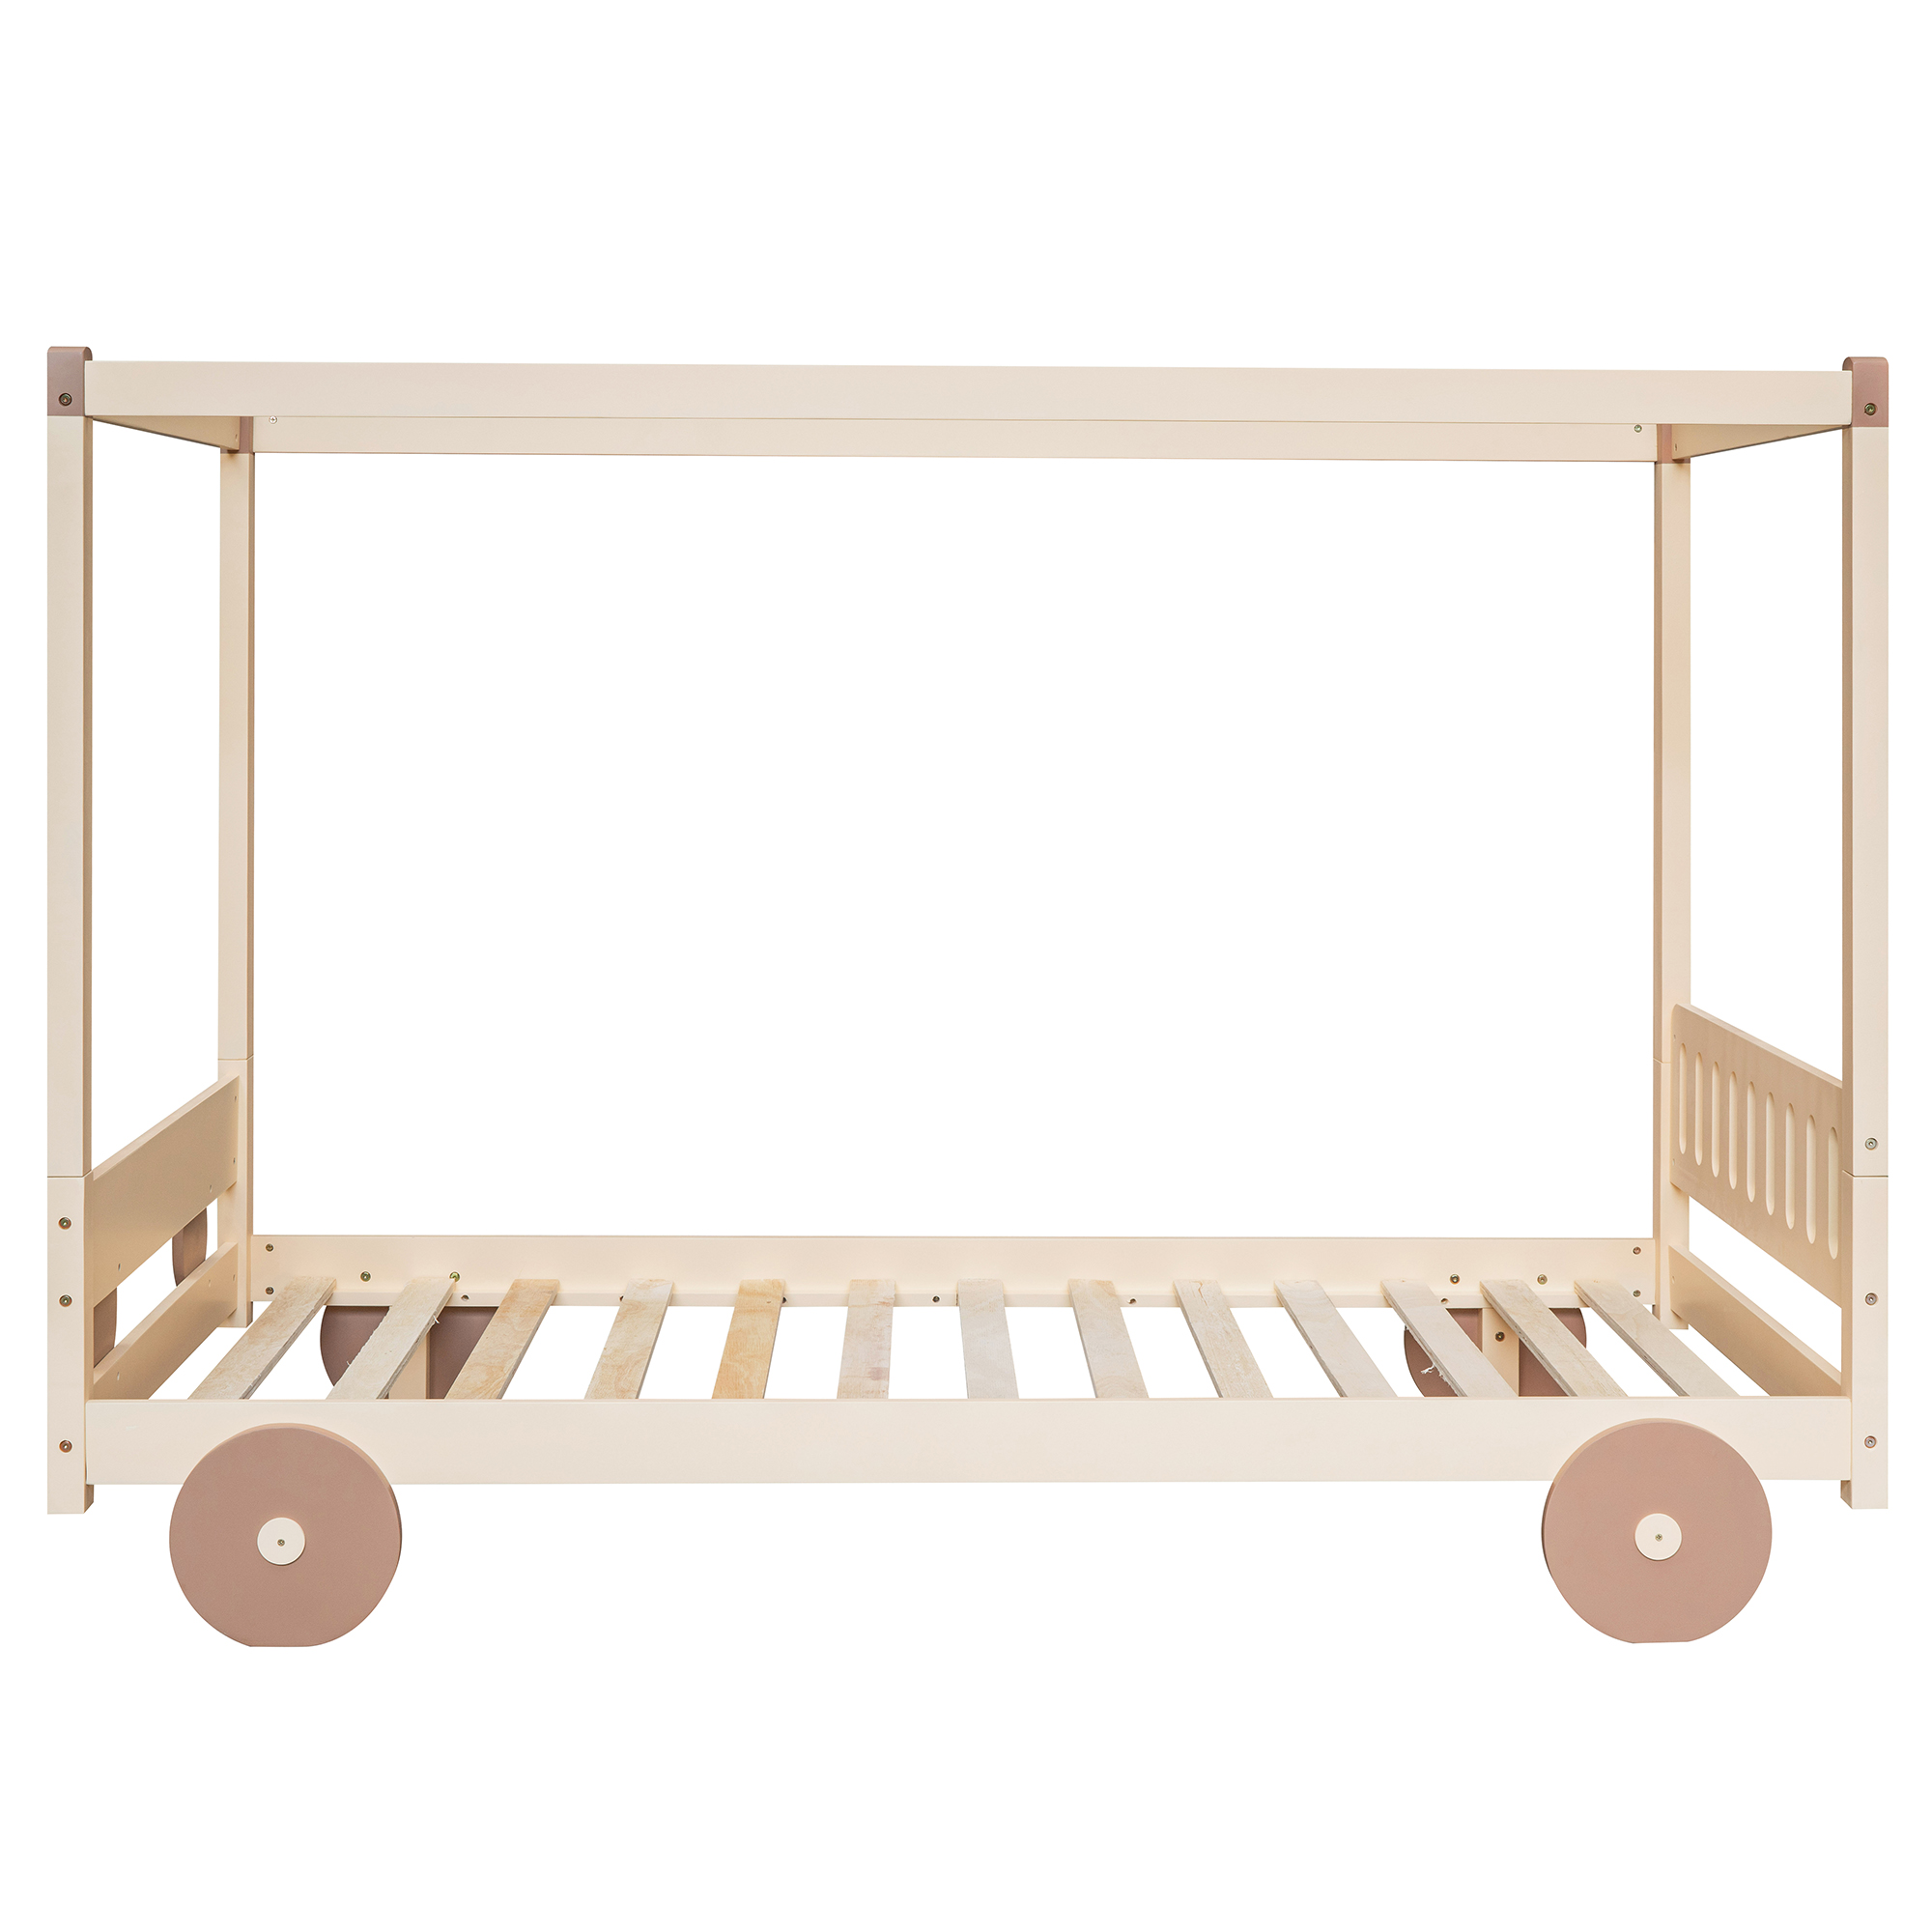 Artlia Twin Size Canopy Car-Shaped Platform Bed,Natural+Brown - image 2 of 7